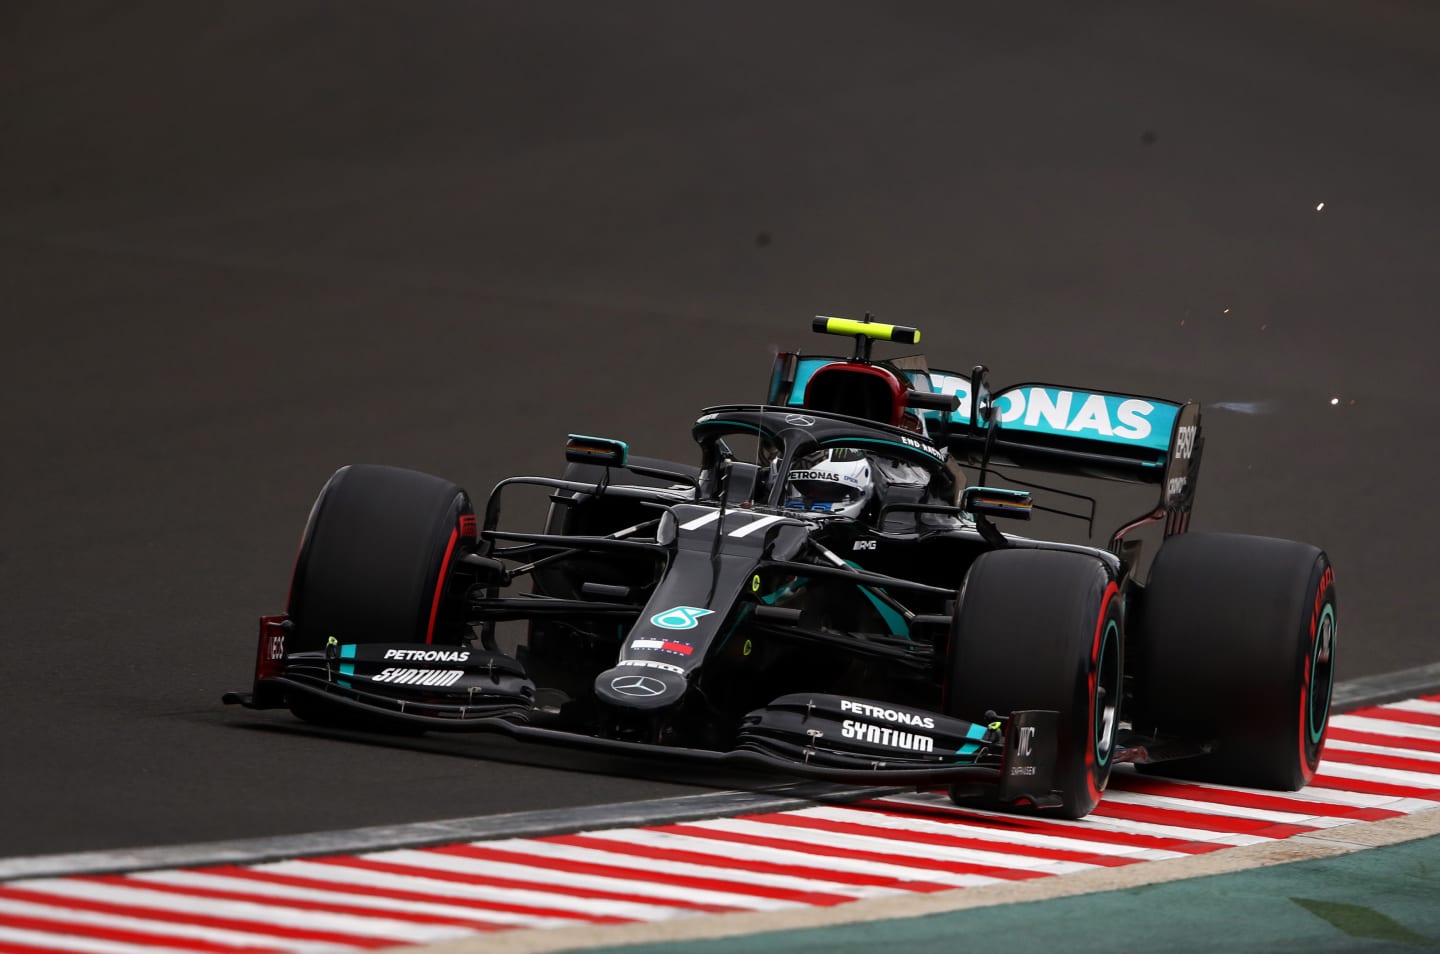 BUDAPEST, HUNGARY - JULY 18: Valtteri Bottas of Finland driving the (77) Mercedes AMG Petronas F1 Team Mercedes W11 on track during qualifying for the F1 Grand Prix of Hungary at Hungaroring on July 18, 2020 in Budapest, Hungary. (Photo by Bryn Lennon/Getty Images)